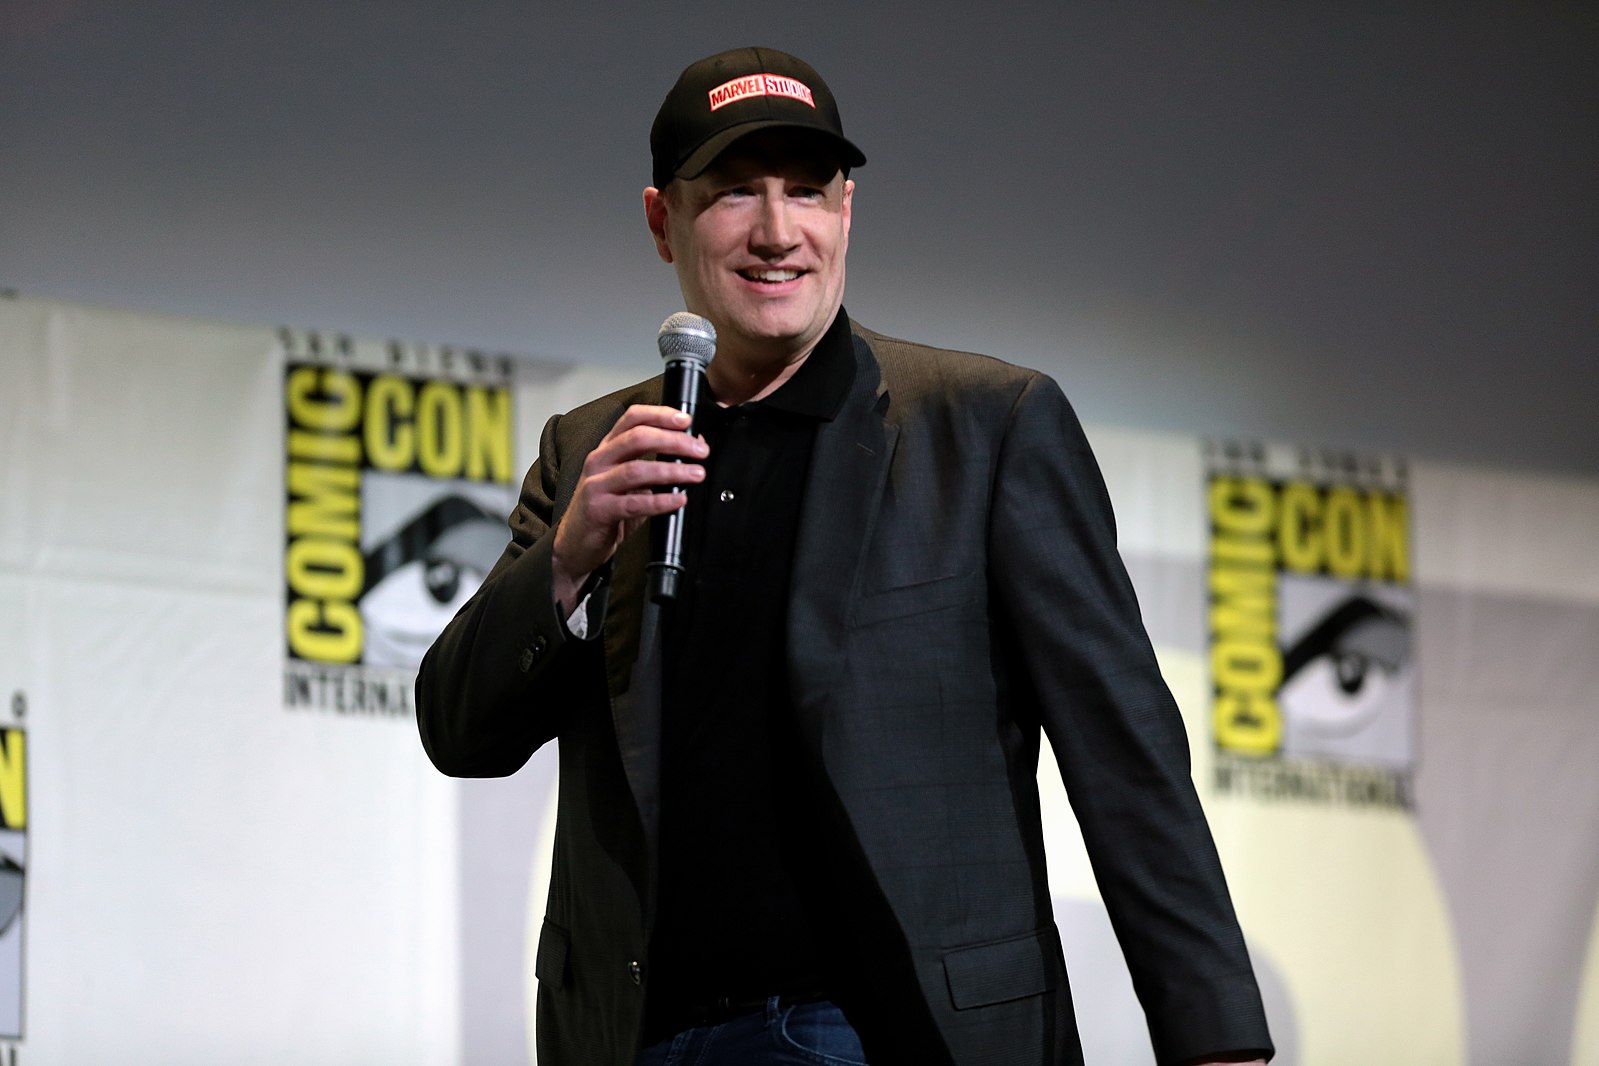 Will we get tired of superhero movies? One person who doesn't think so is Marvel Boss Kevin Feige. Check out what he said.